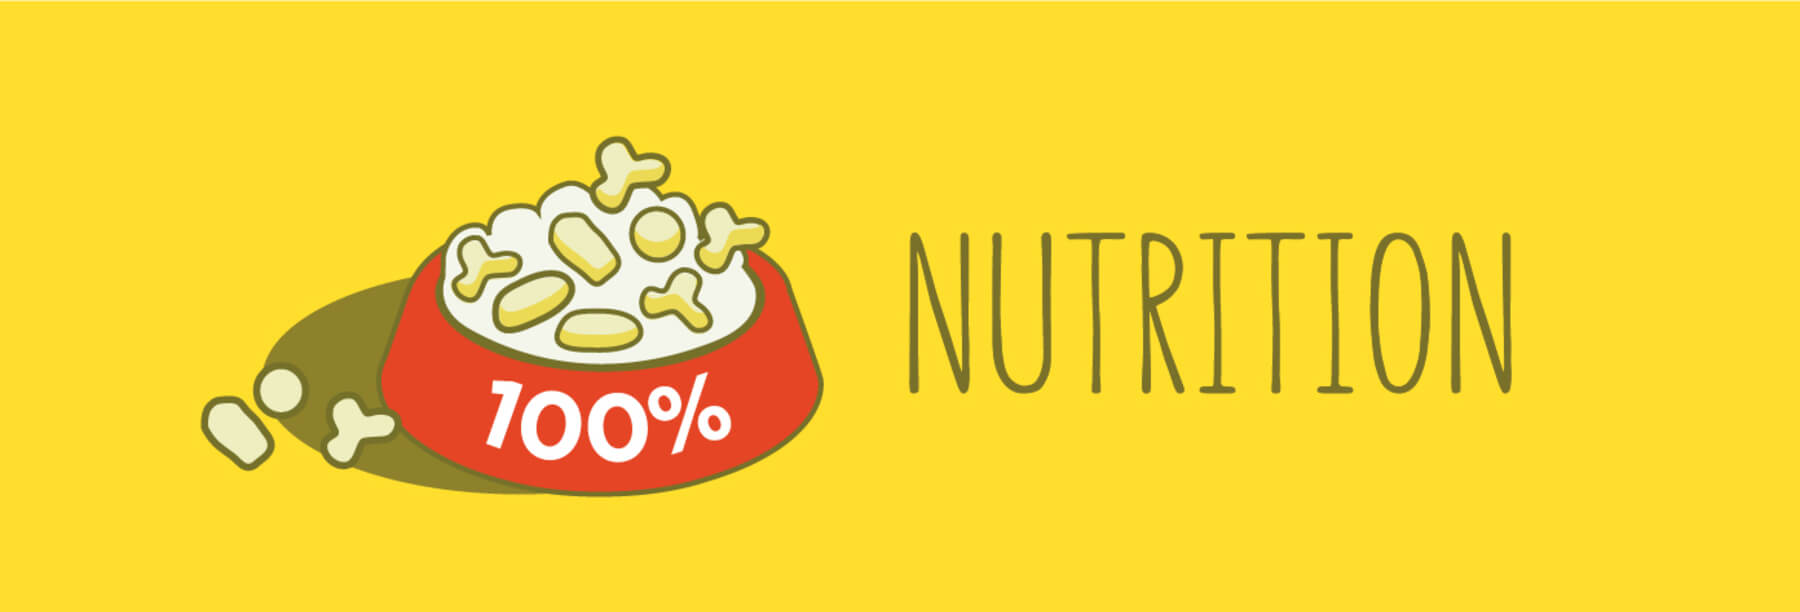 100% Nutrition Friskies chat